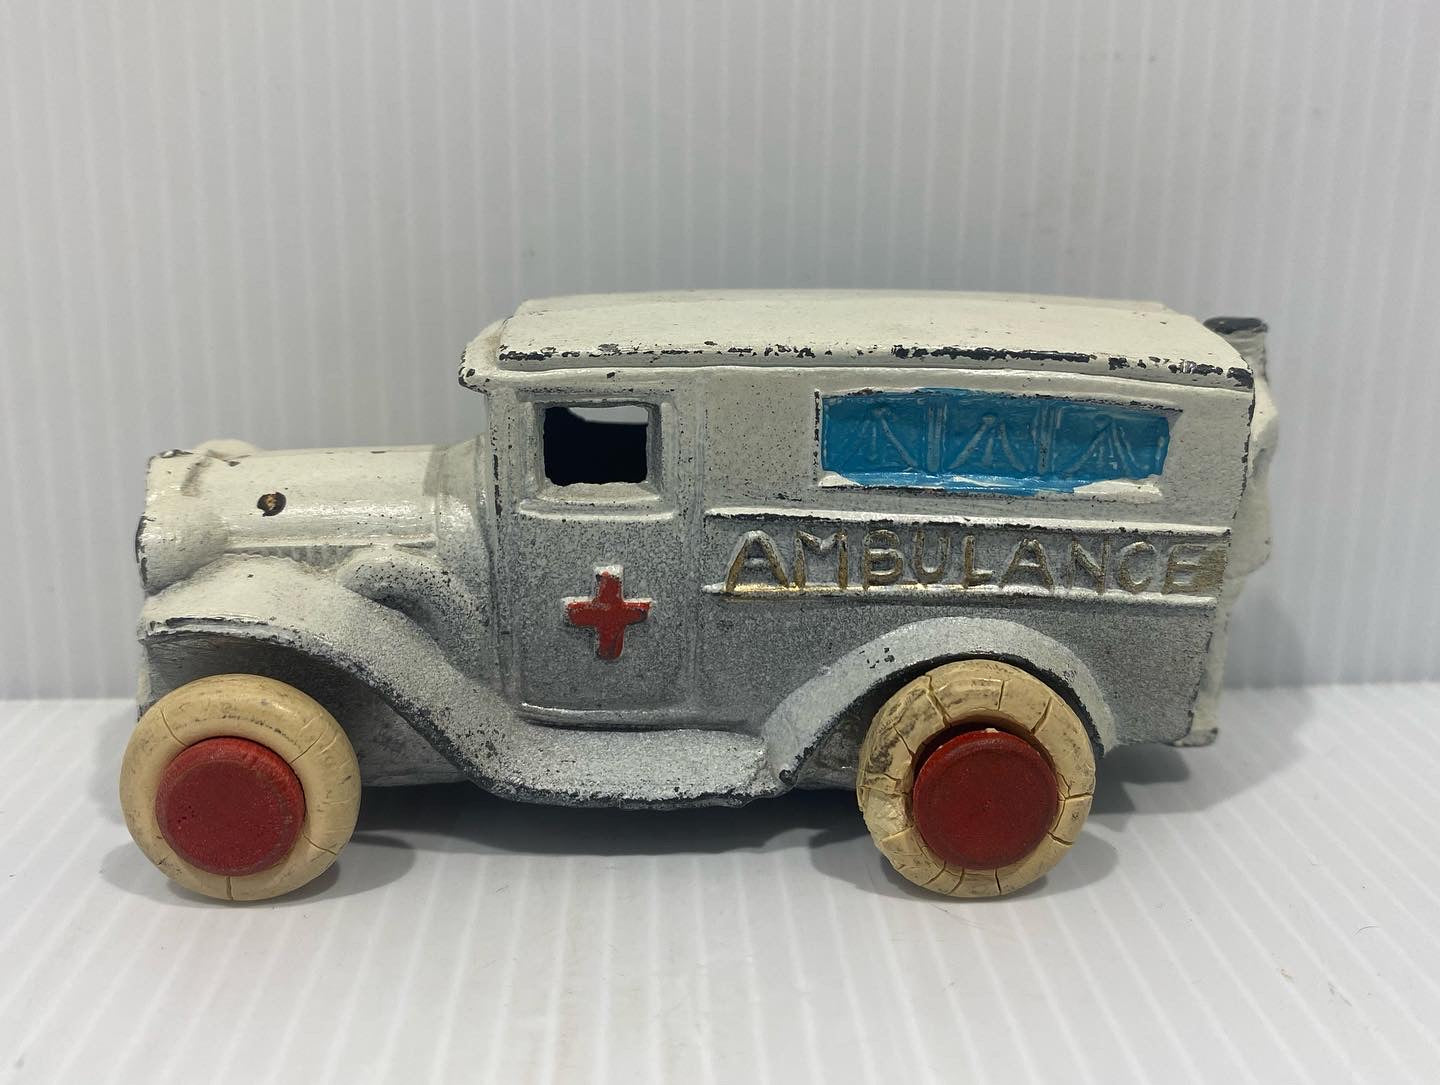 Rare Antique Savoye Pewter Toy Company Ambulance Car with a cast-in attendant perched precariously on the rear step